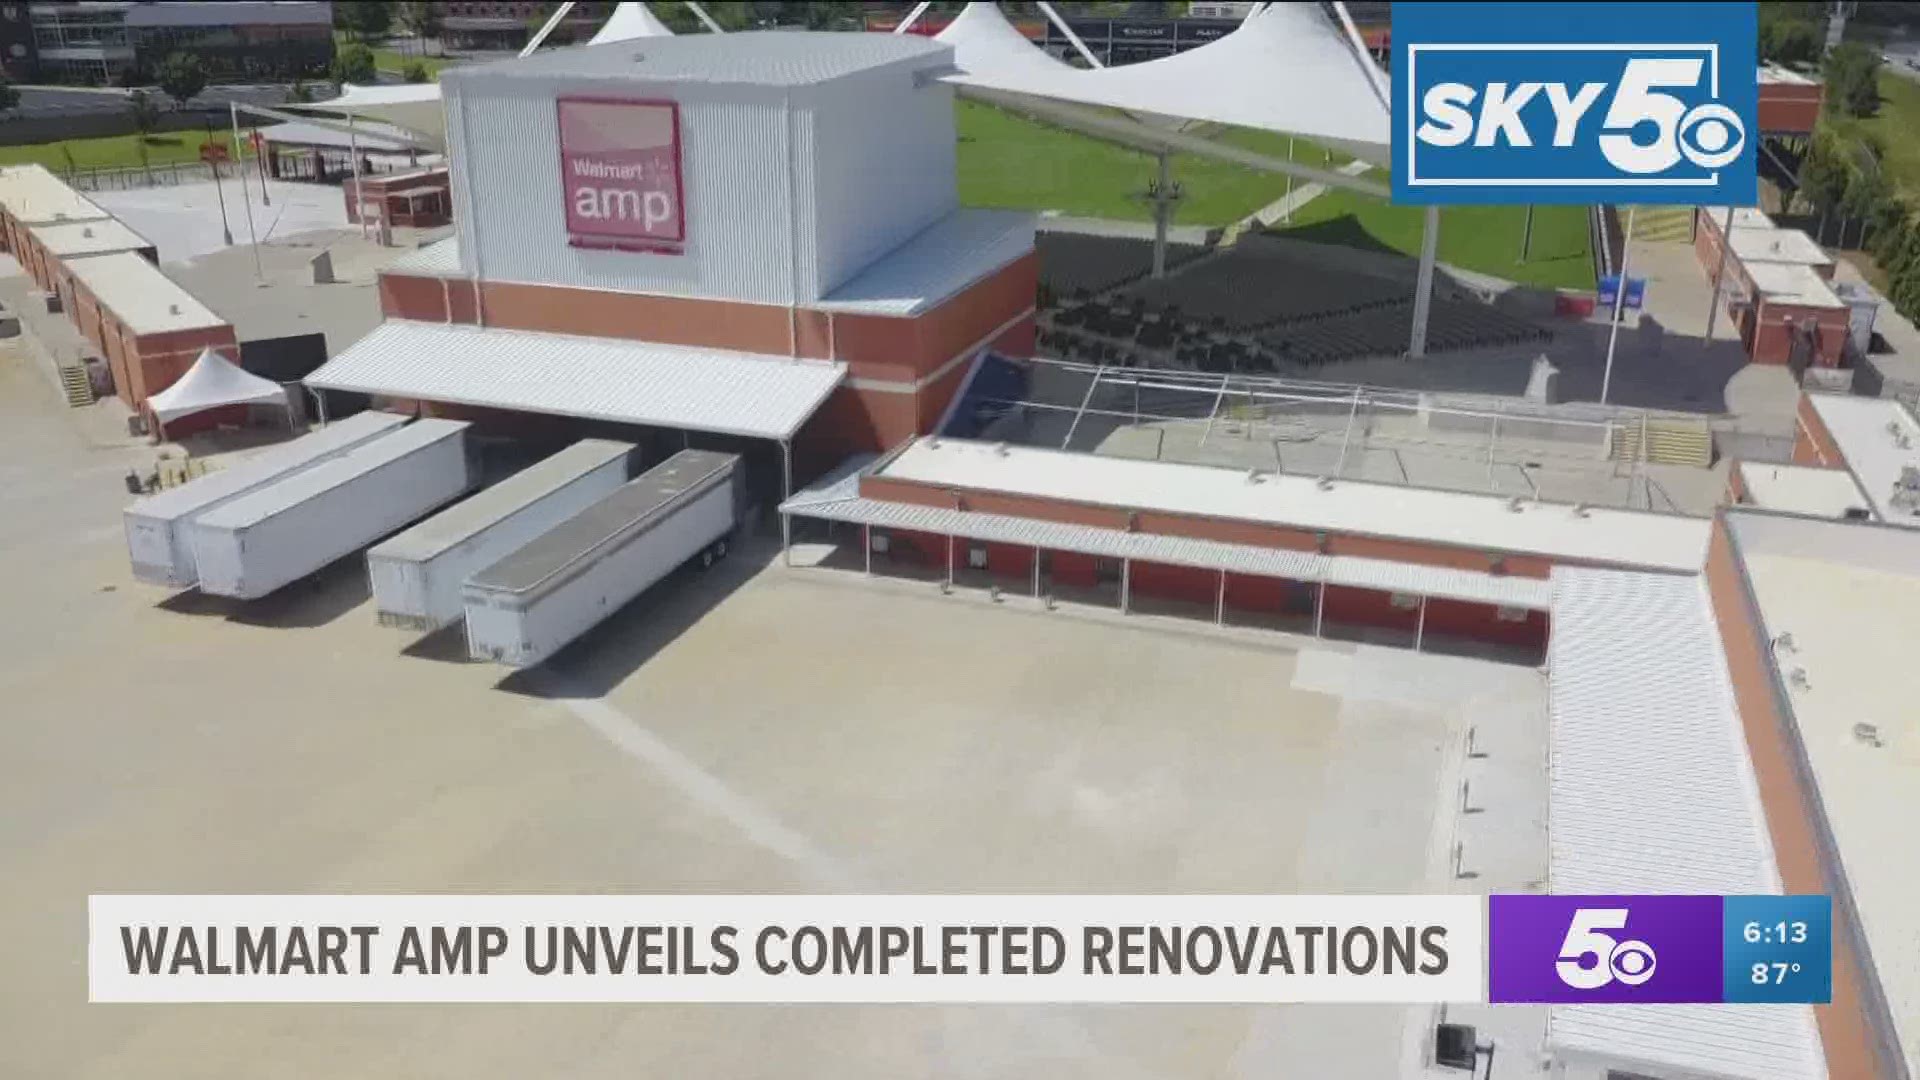 The $17 million project was completed on schedule. Live music concerts are expected to return next year. https://bit.ly/328LuMs